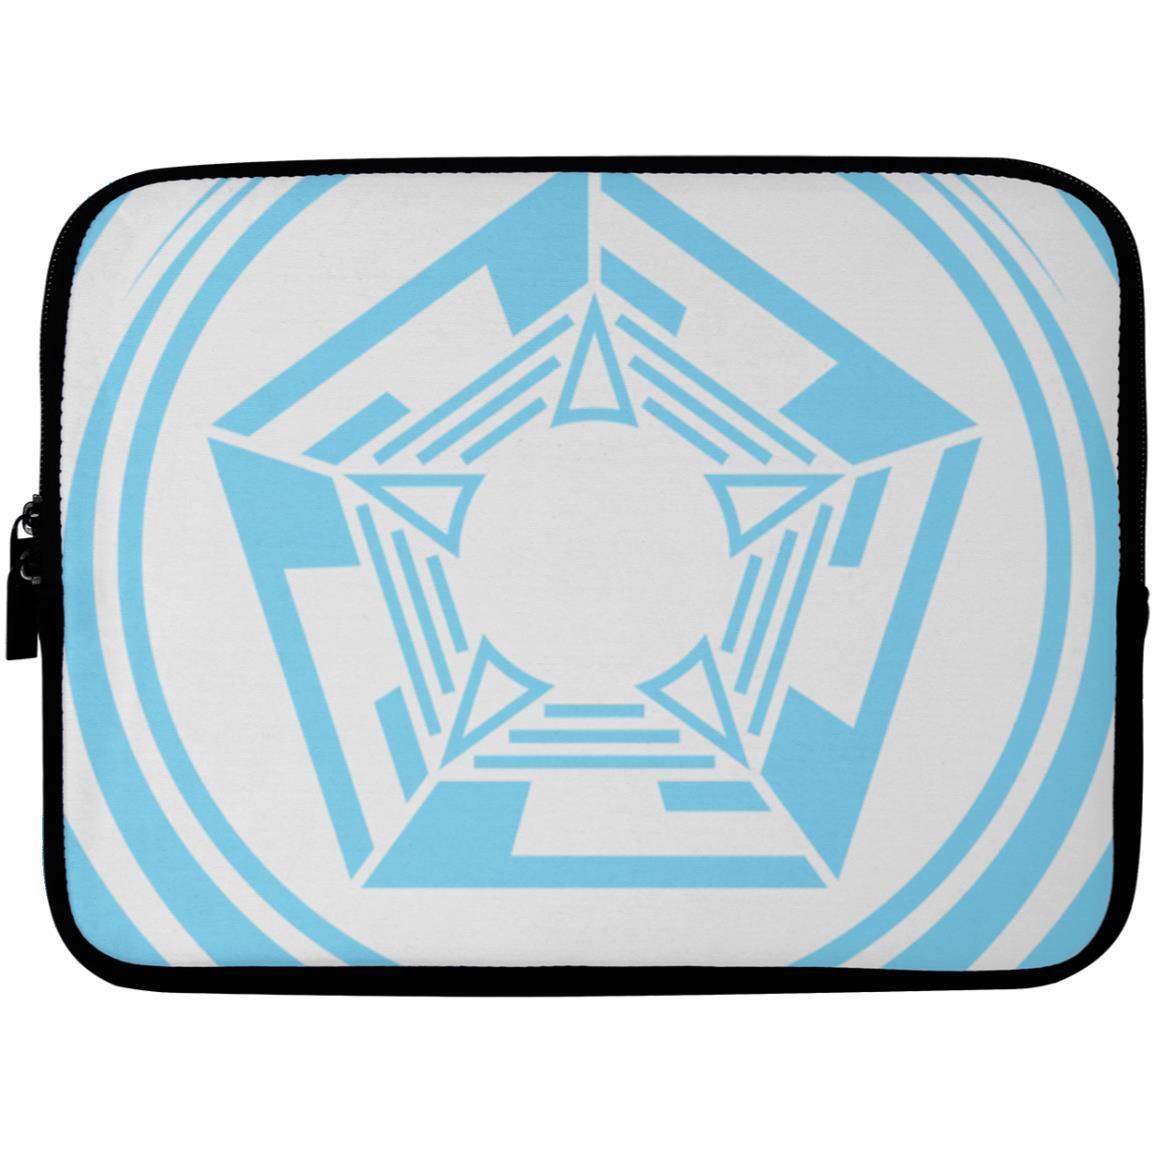 Crop Circle Laptop Sleeve - Barton-Le-Cley 2 - Shapes of Wisdom